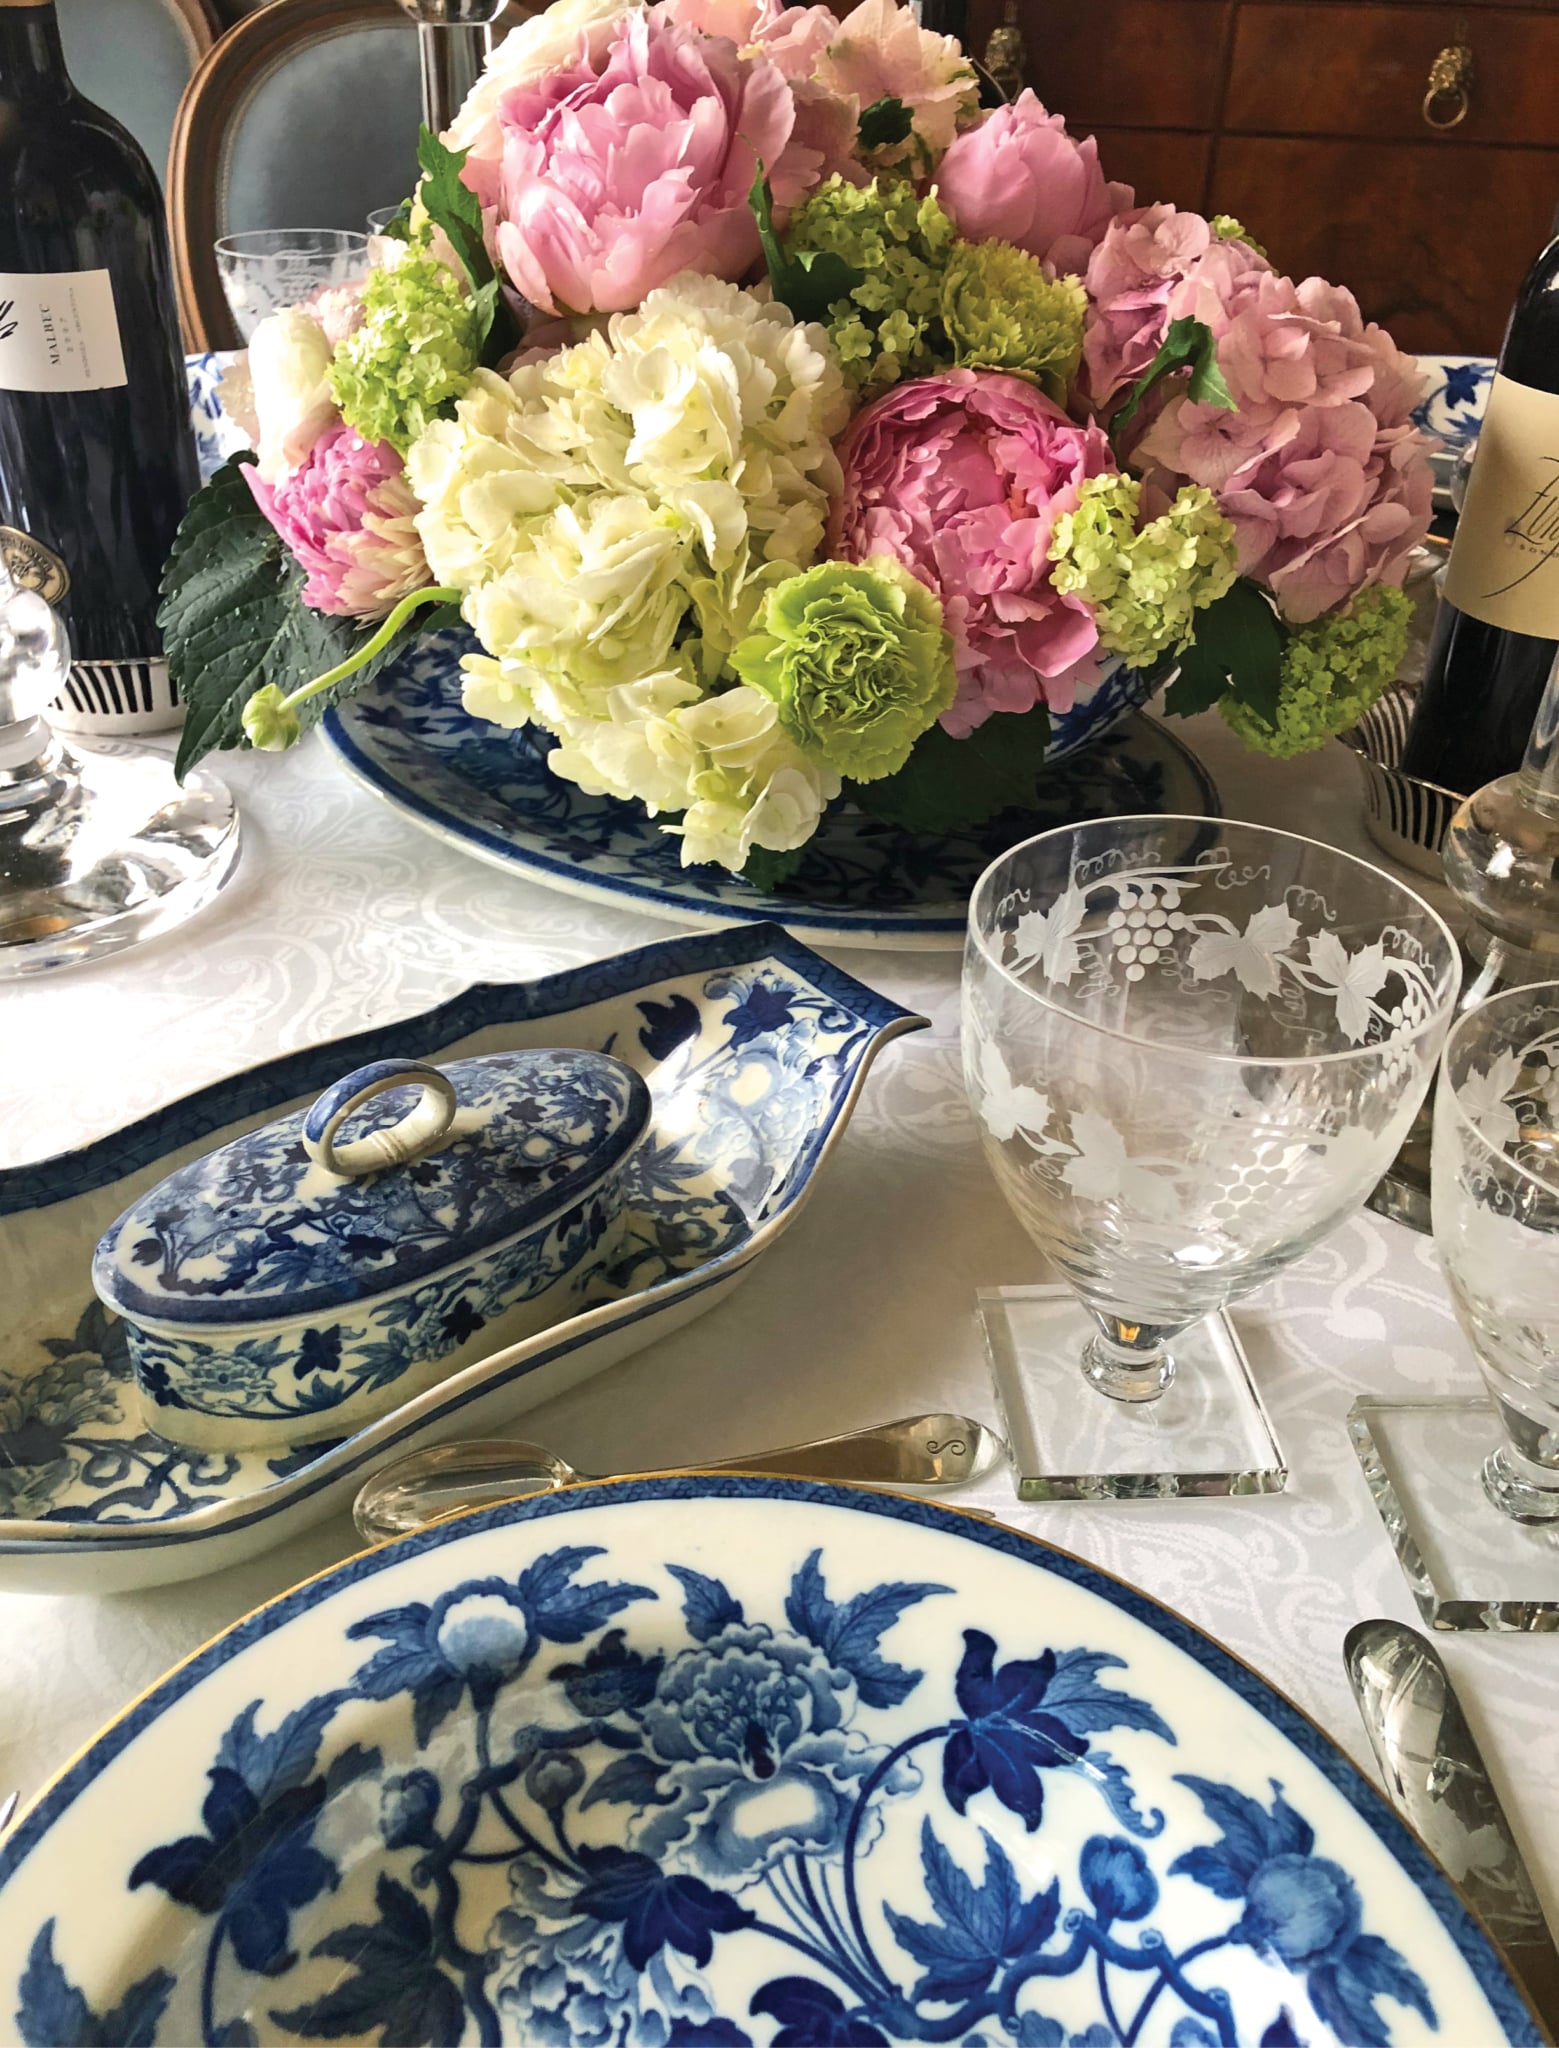 In Stephanie Stokes' new book The World at Your Table: Inspiring Tabletop Designs. Stephanie creates stunning tablescapes using unique items collected from her travels including Japan, Cartagena, Budapest, and London  as inspiration.